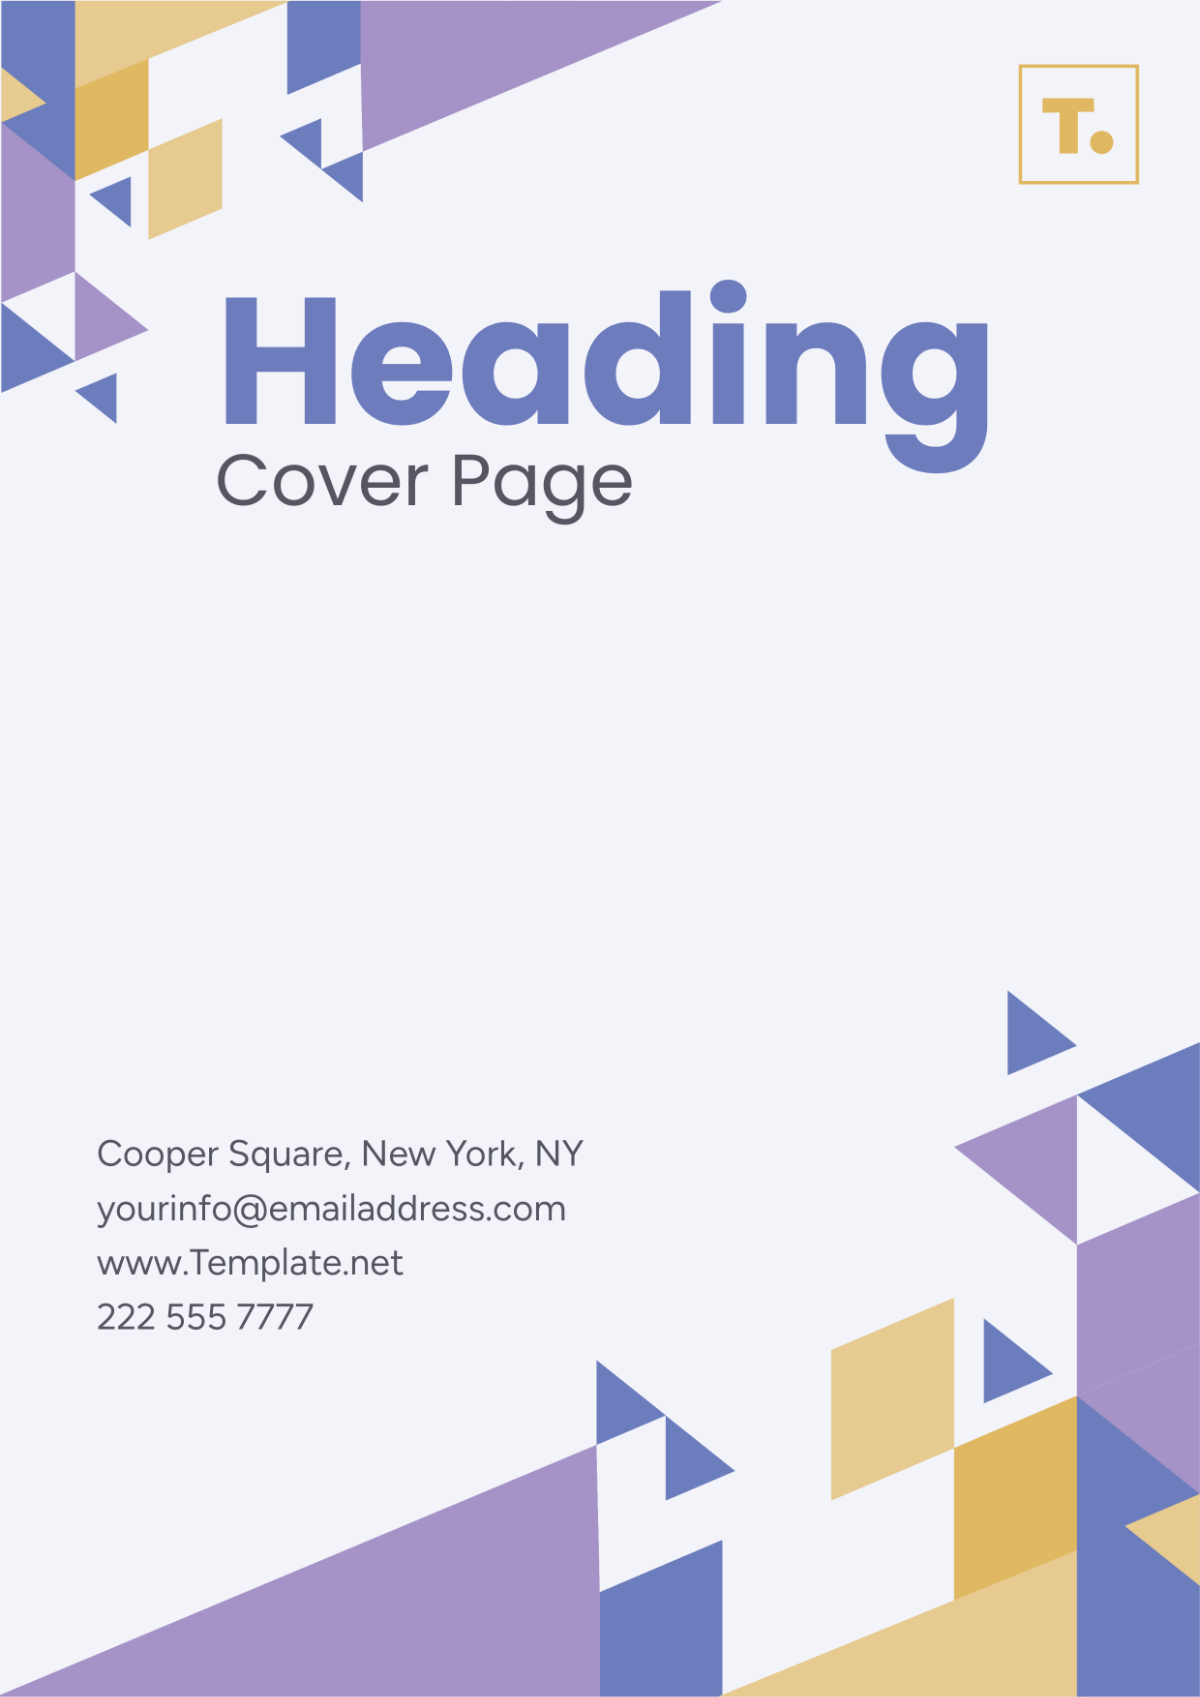 Heading Cover Page